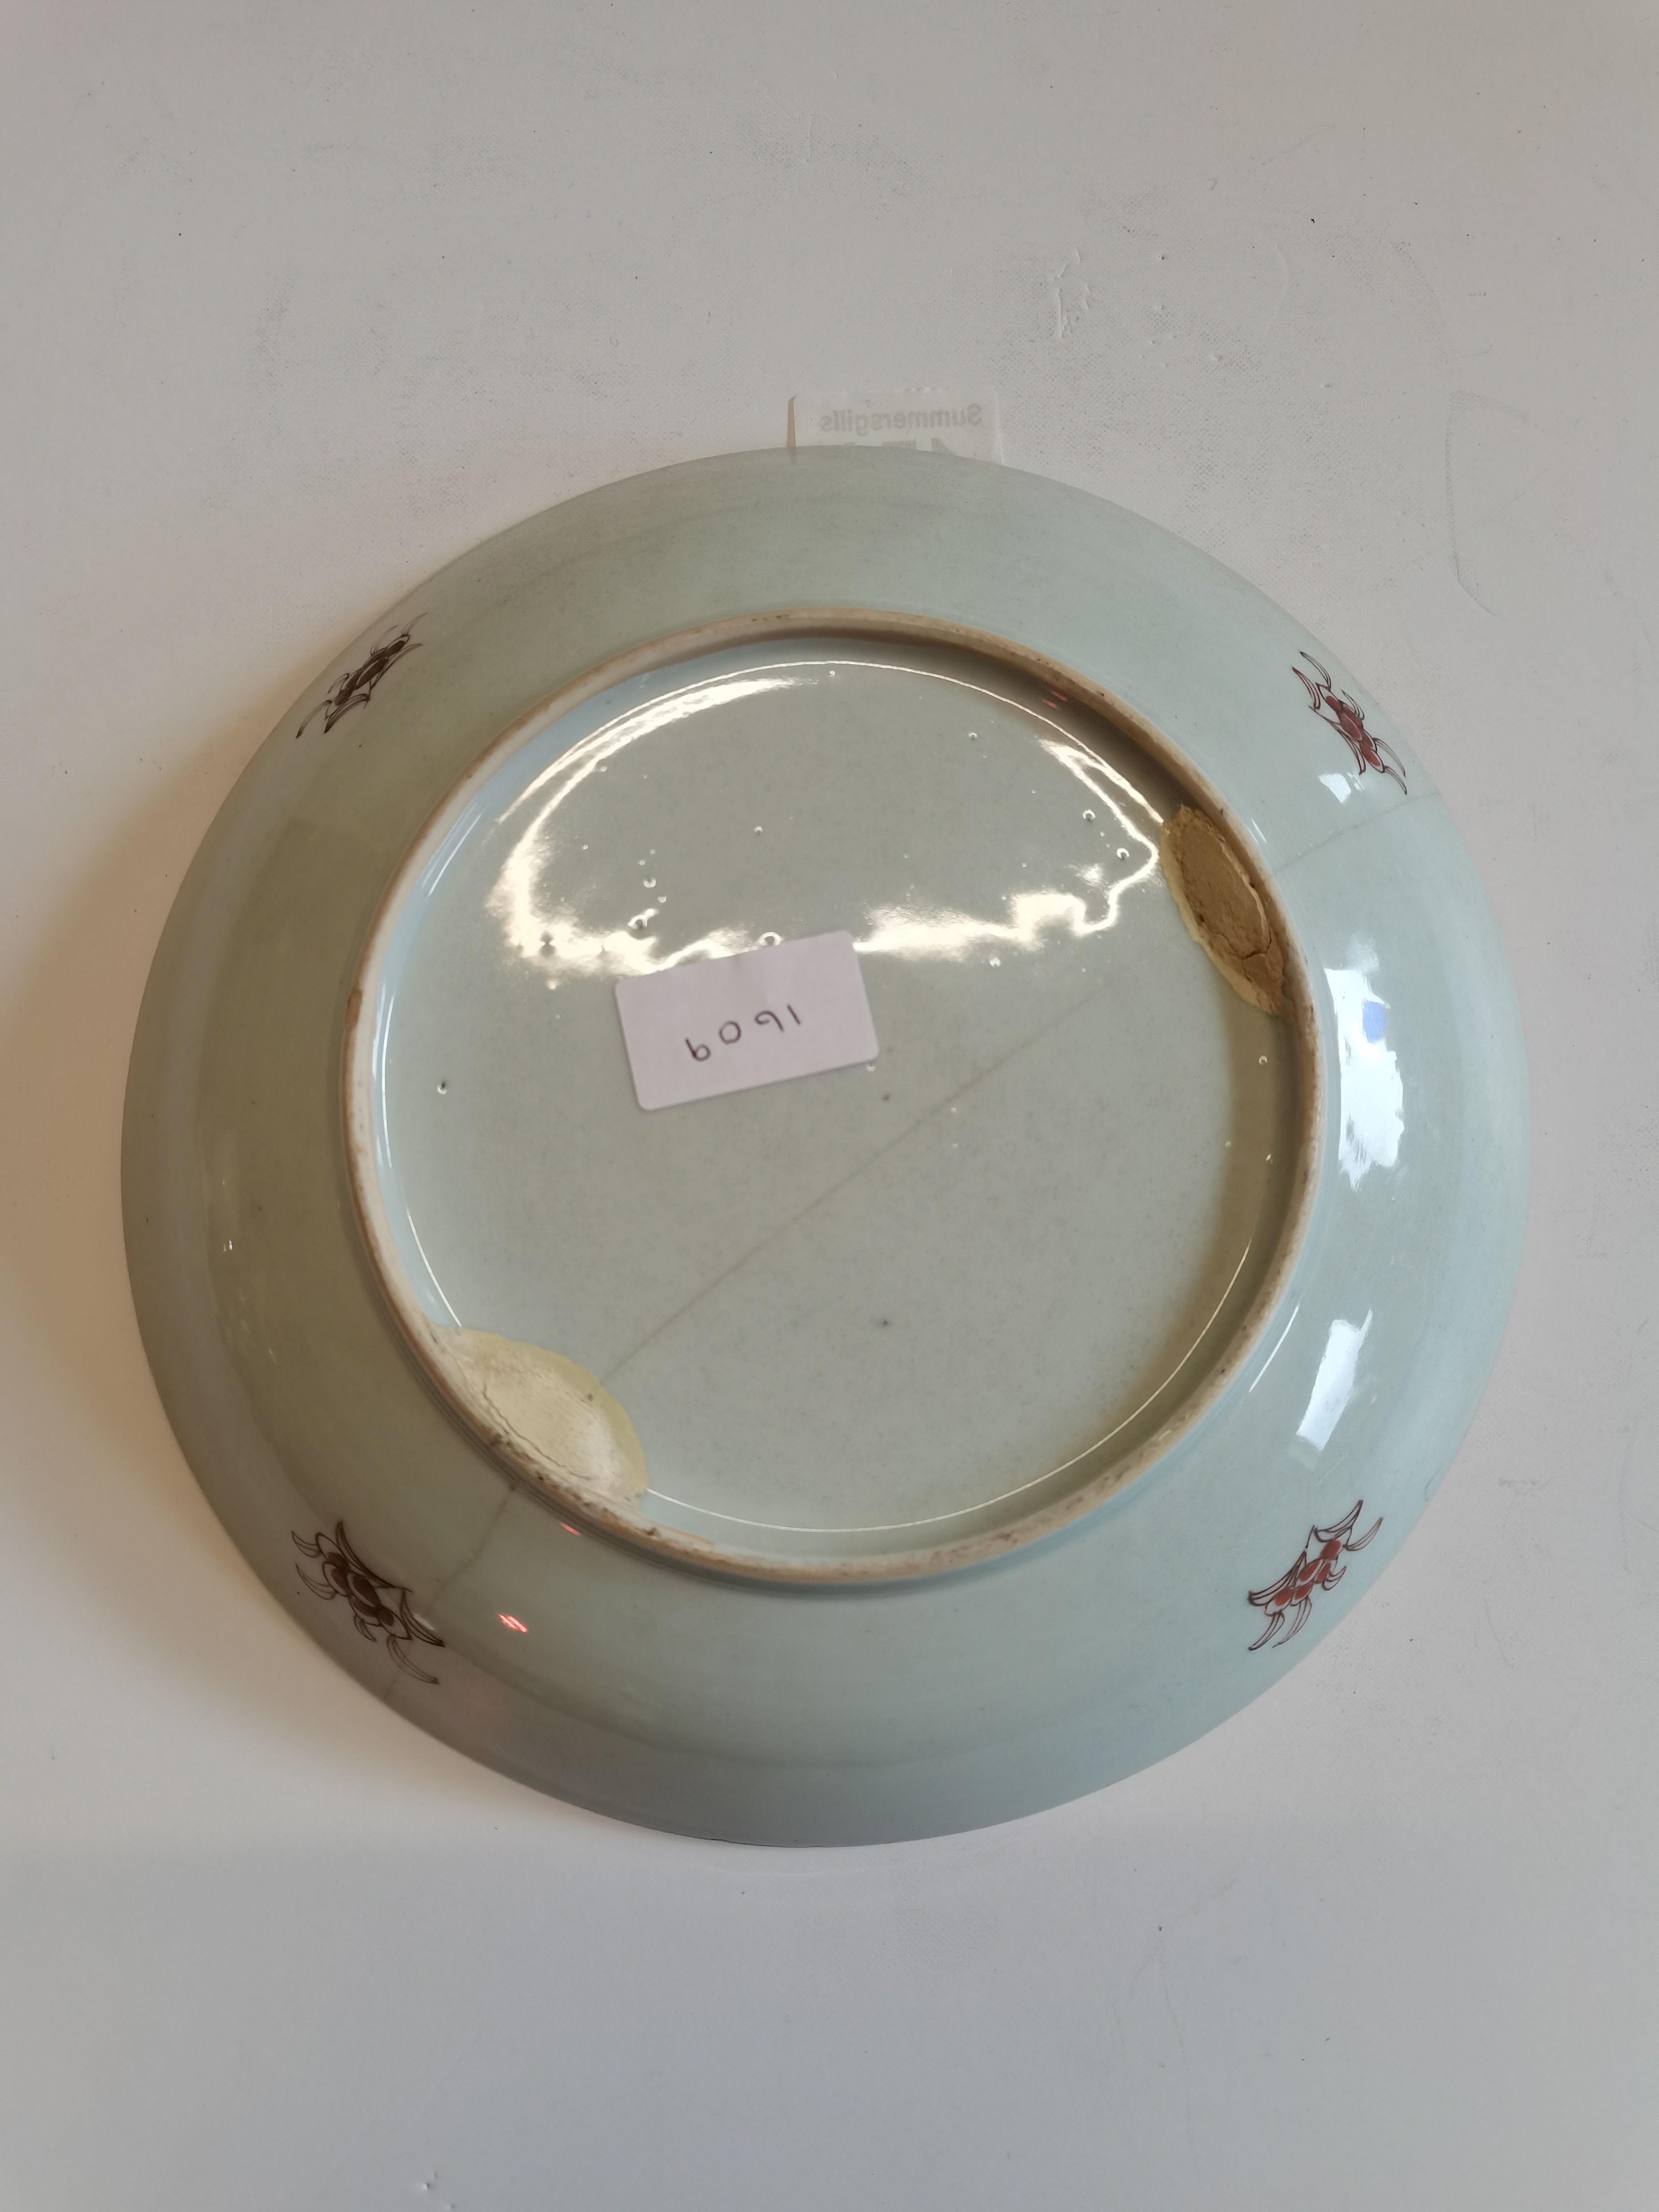 Chinese bowl - has been broken and restored - Image 4 of 4